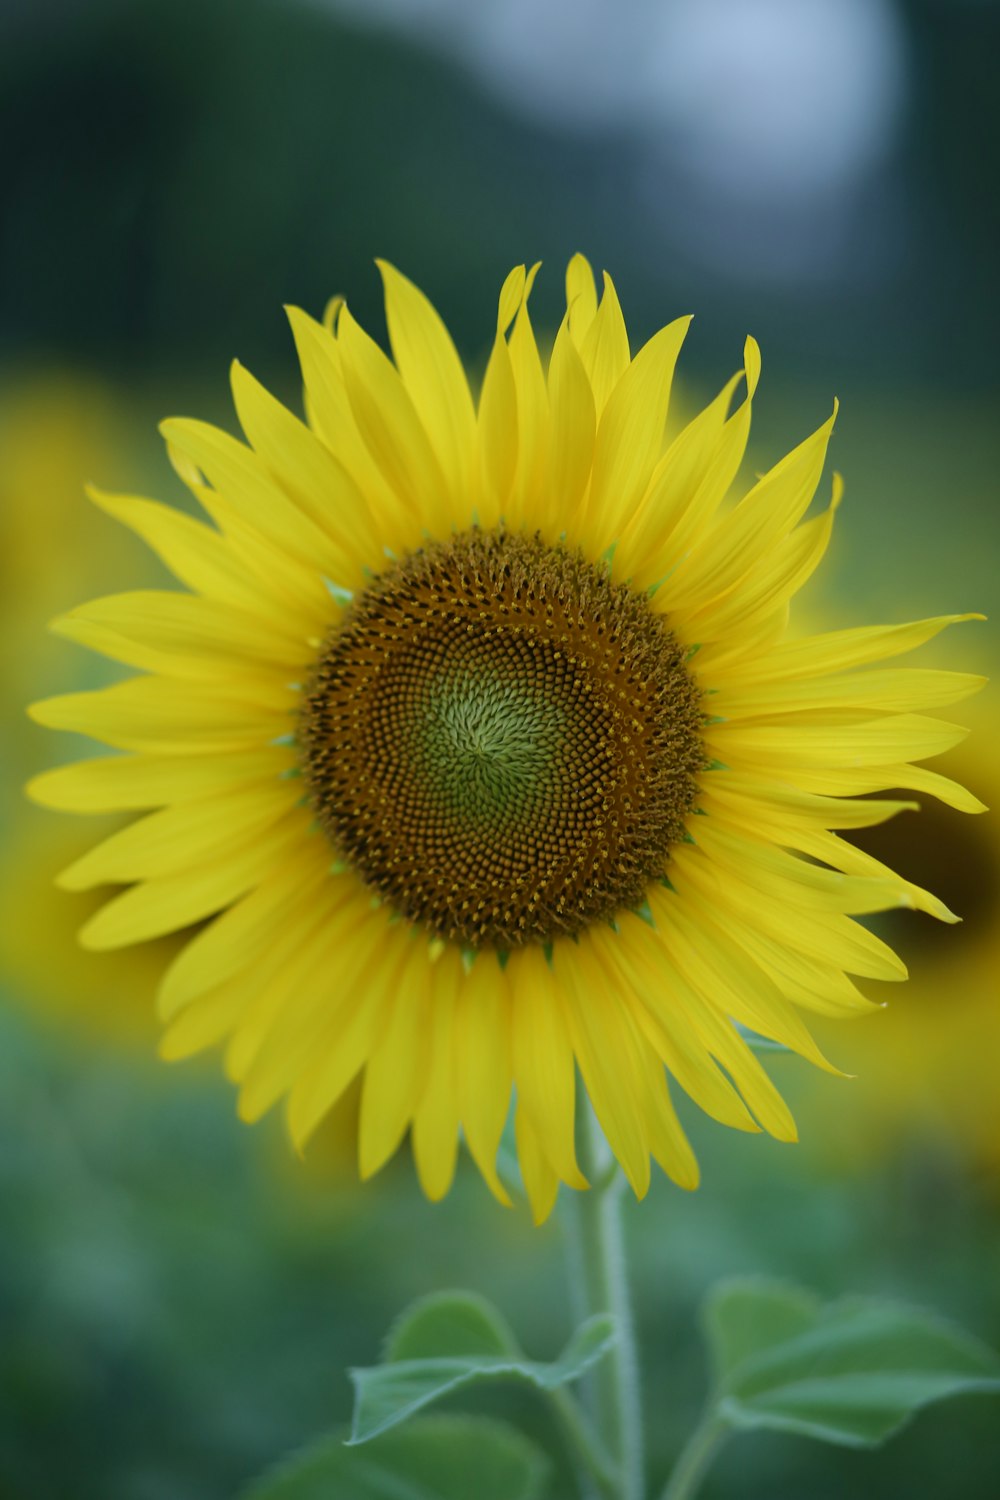 a large yellow sunflower in a field of sunflowers